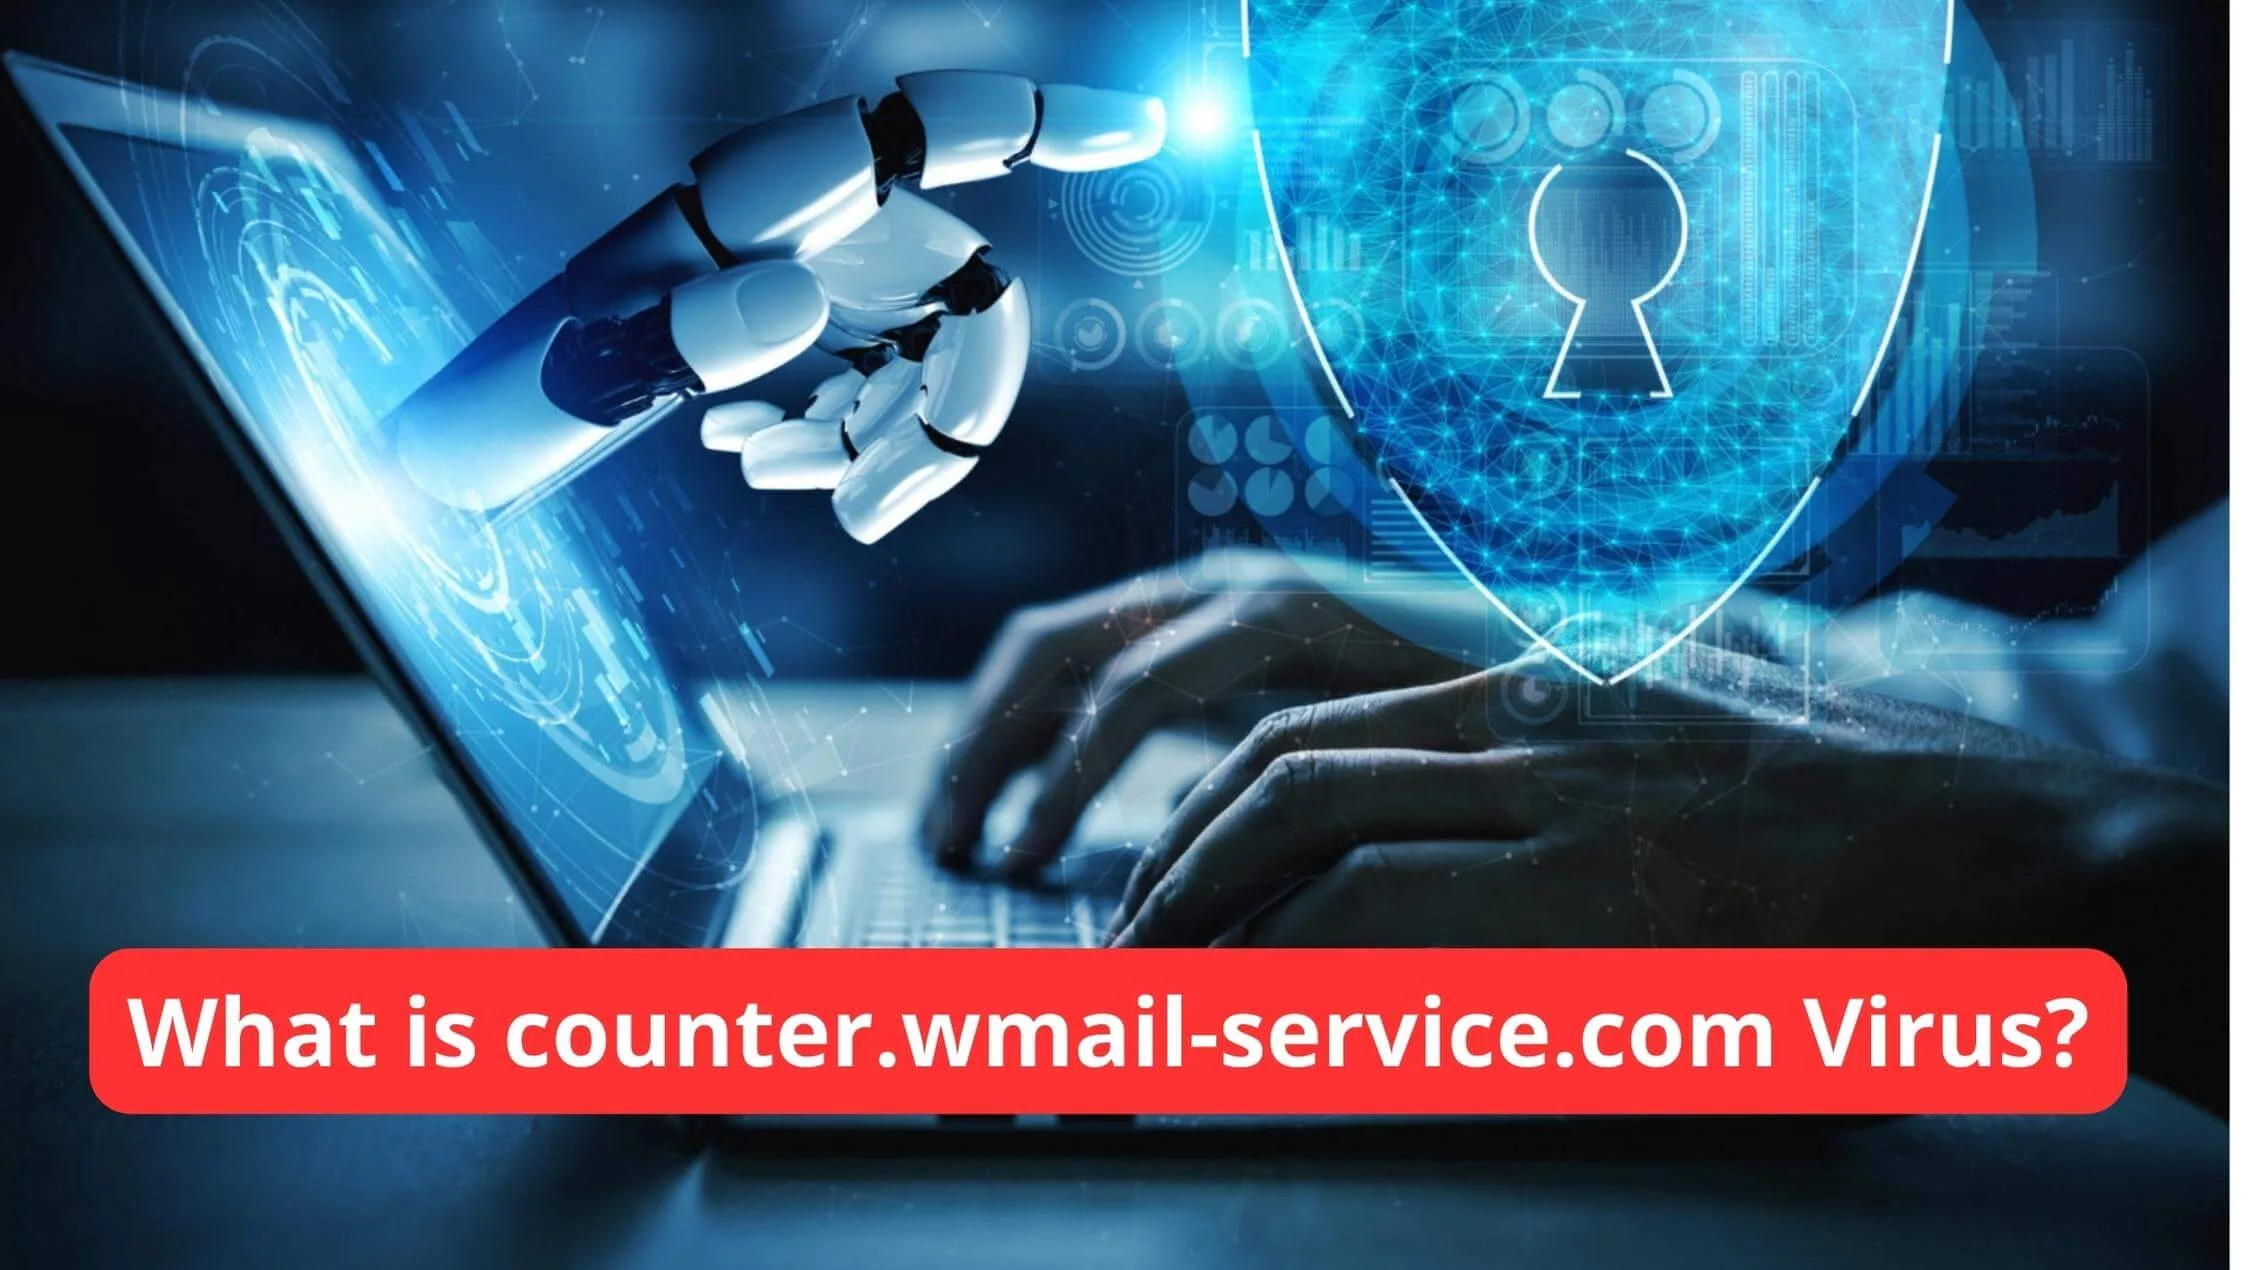 What is counter.wmail-service.com Virus?